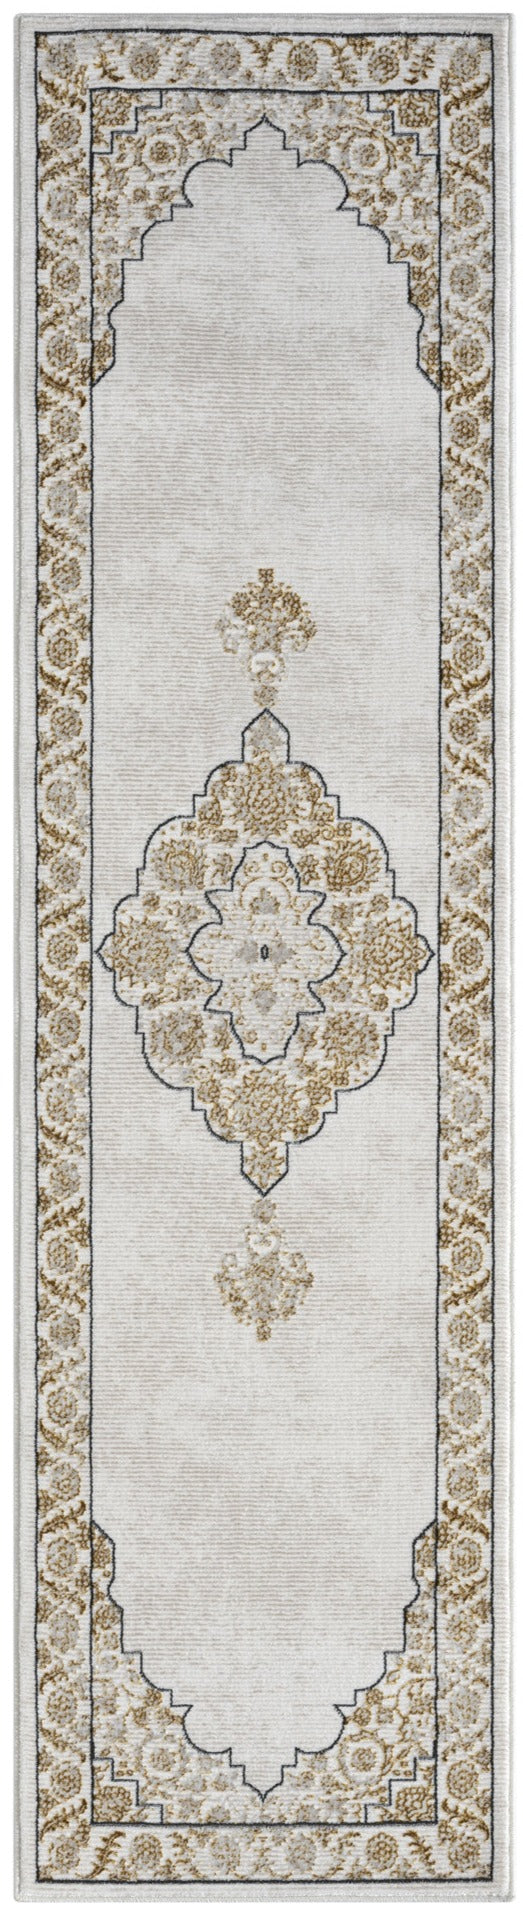 American cover design / Persian weavers Boutique 452 Gold Rug